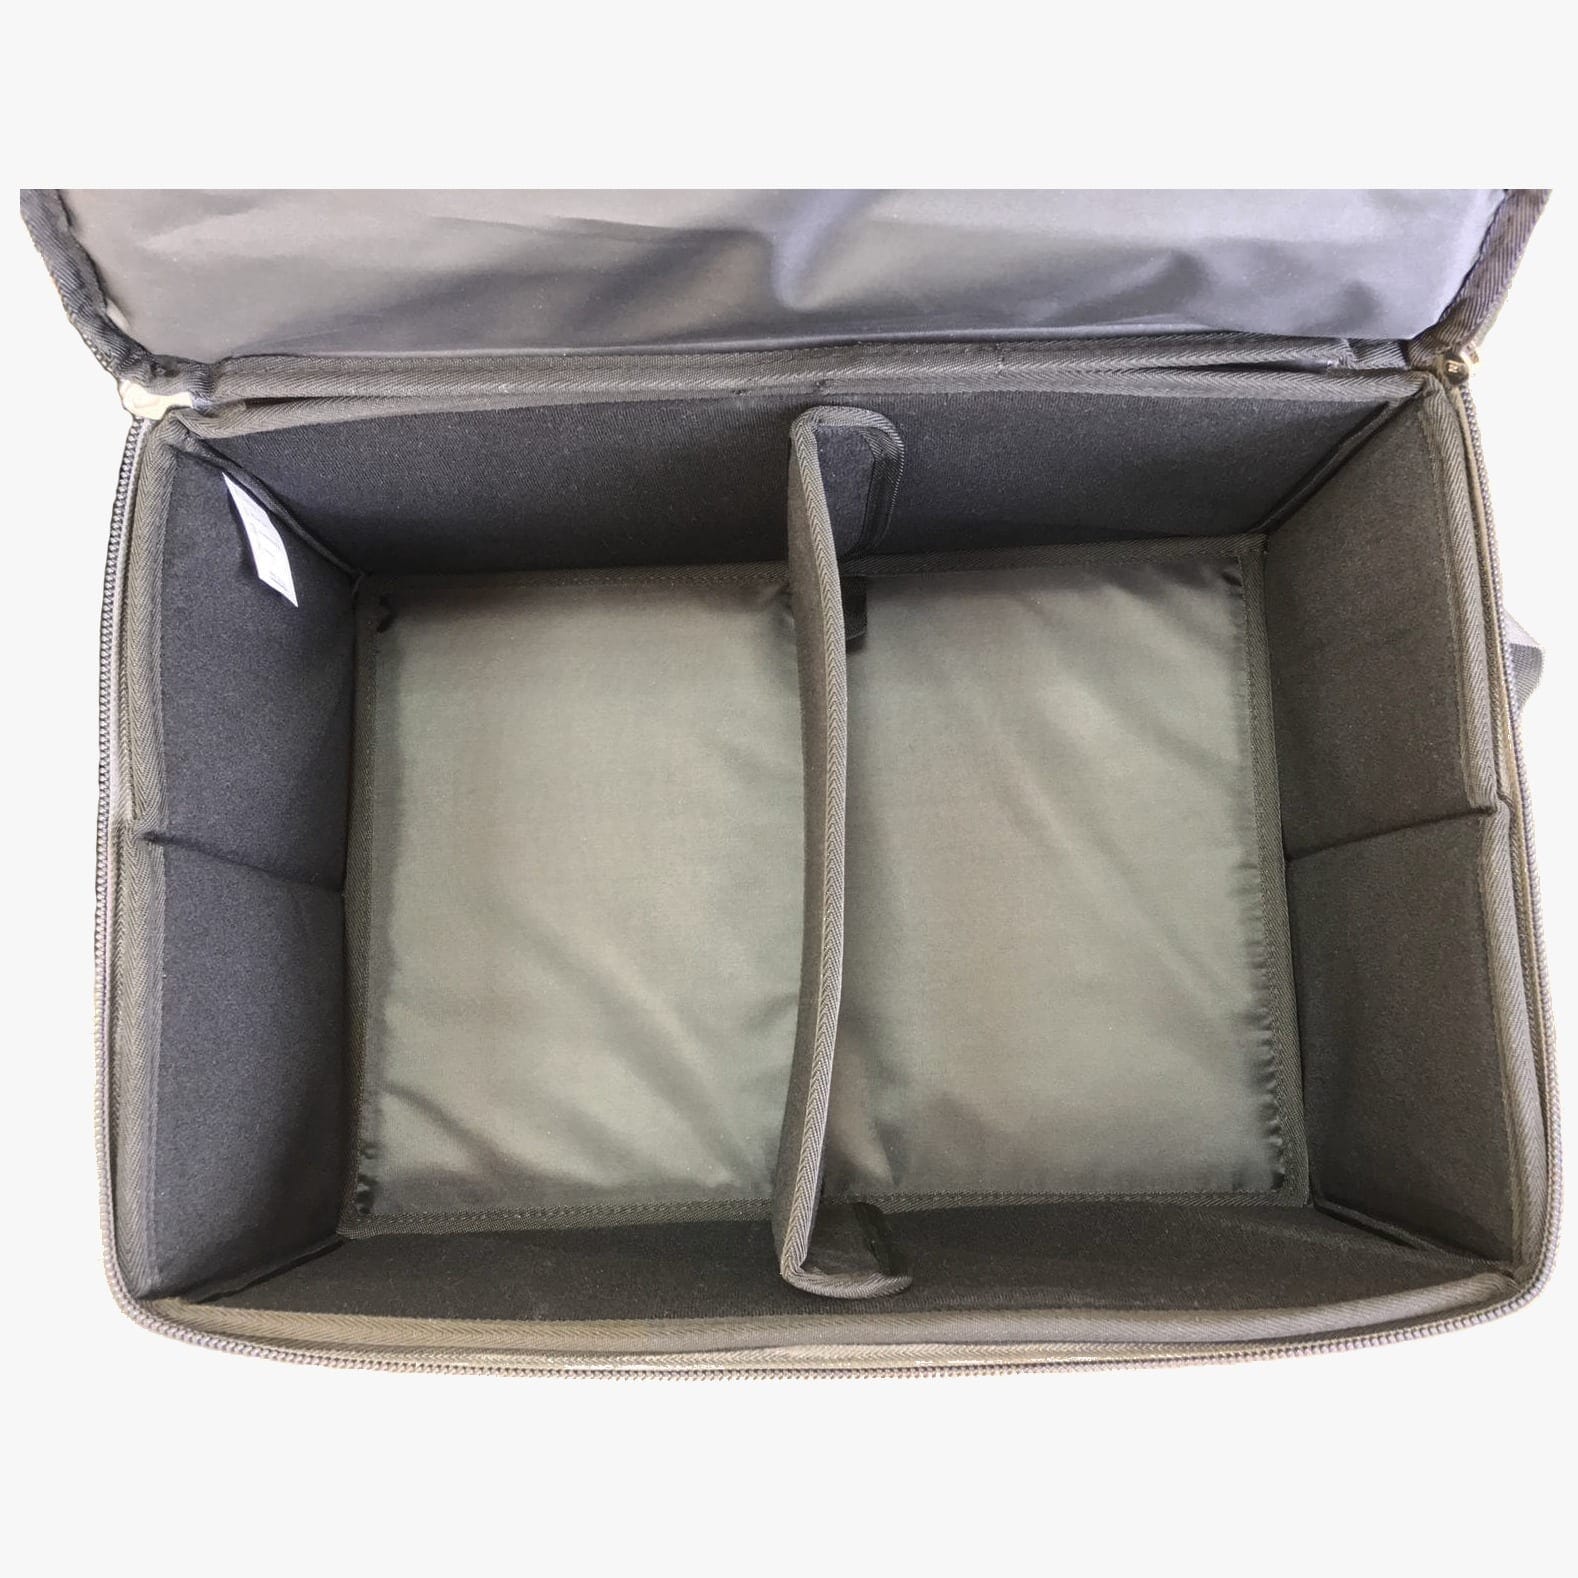 Nomad Storage and Thermal Bags  Boxes & Bags Nomad Fox- Adventure Imports